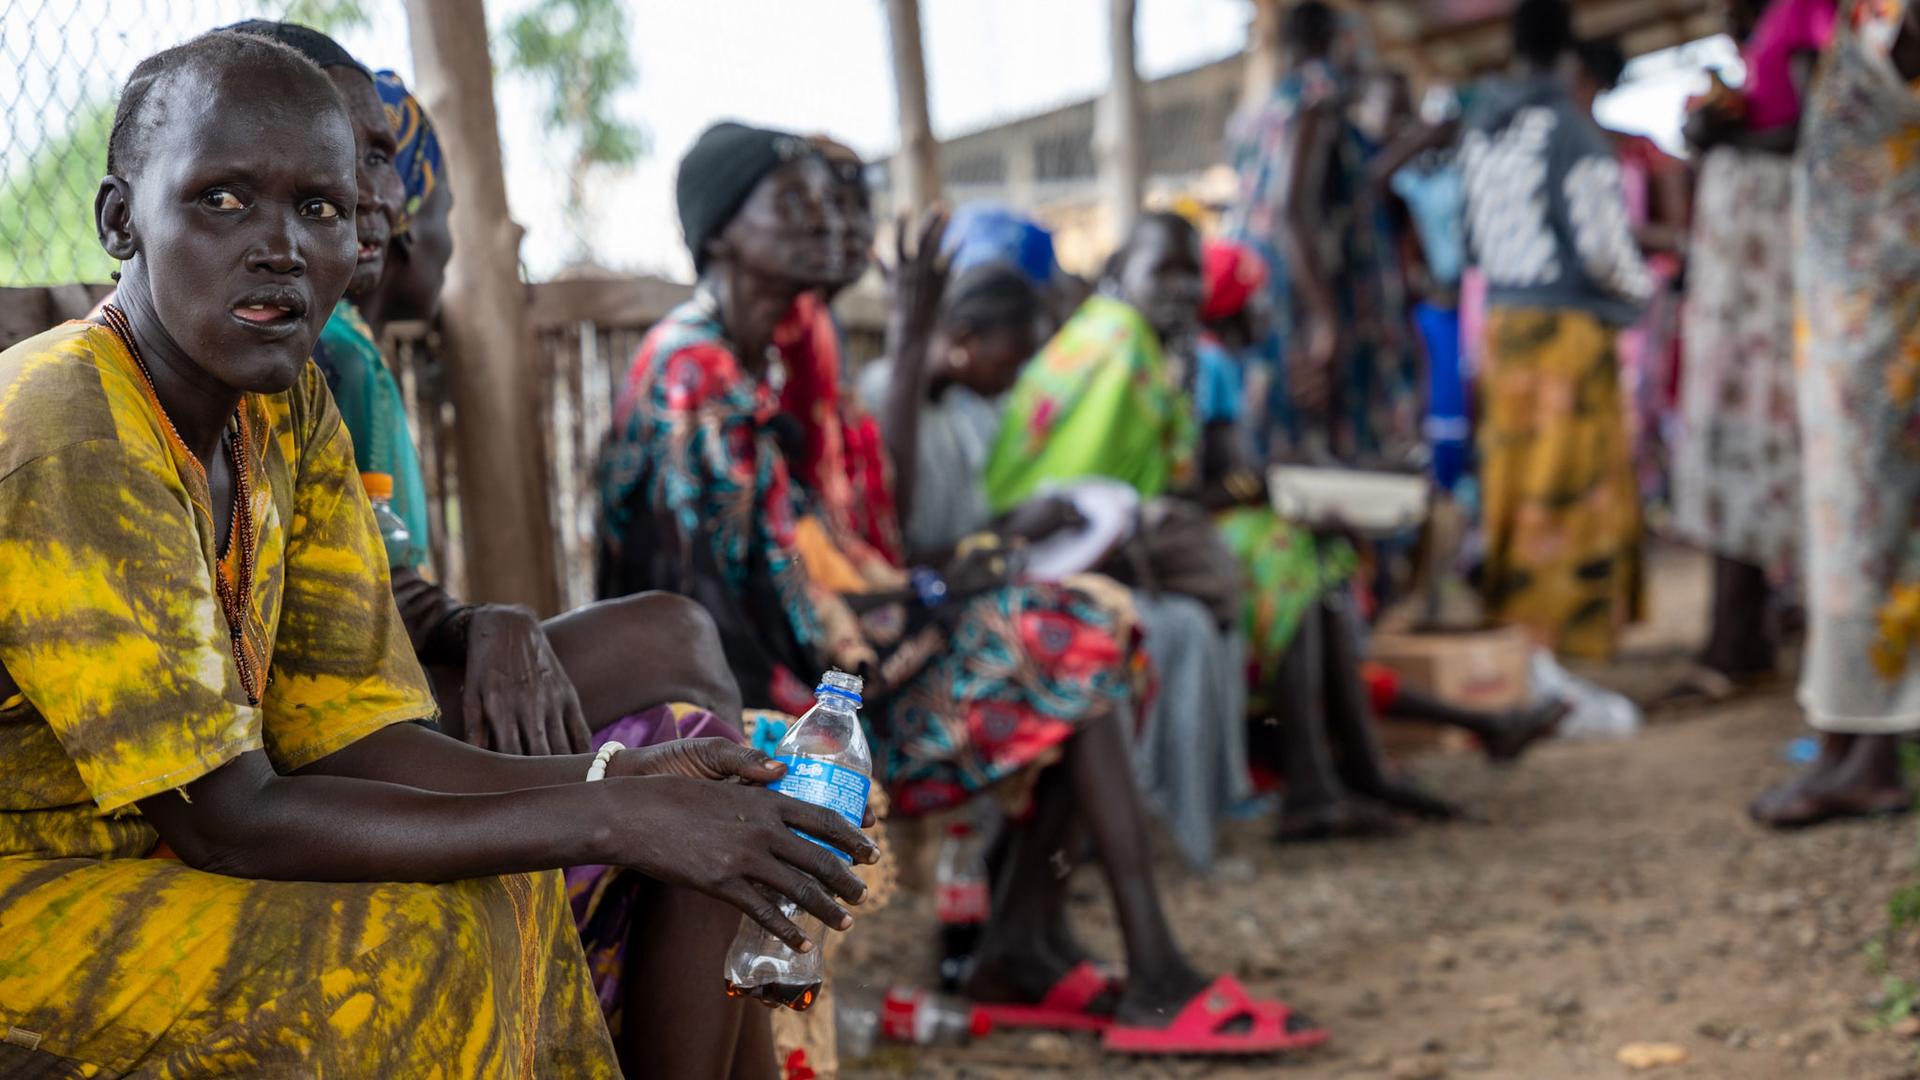 Internally displaced people form a line at a food distribution center at a camp for displaced people in Juba, South Sudan.